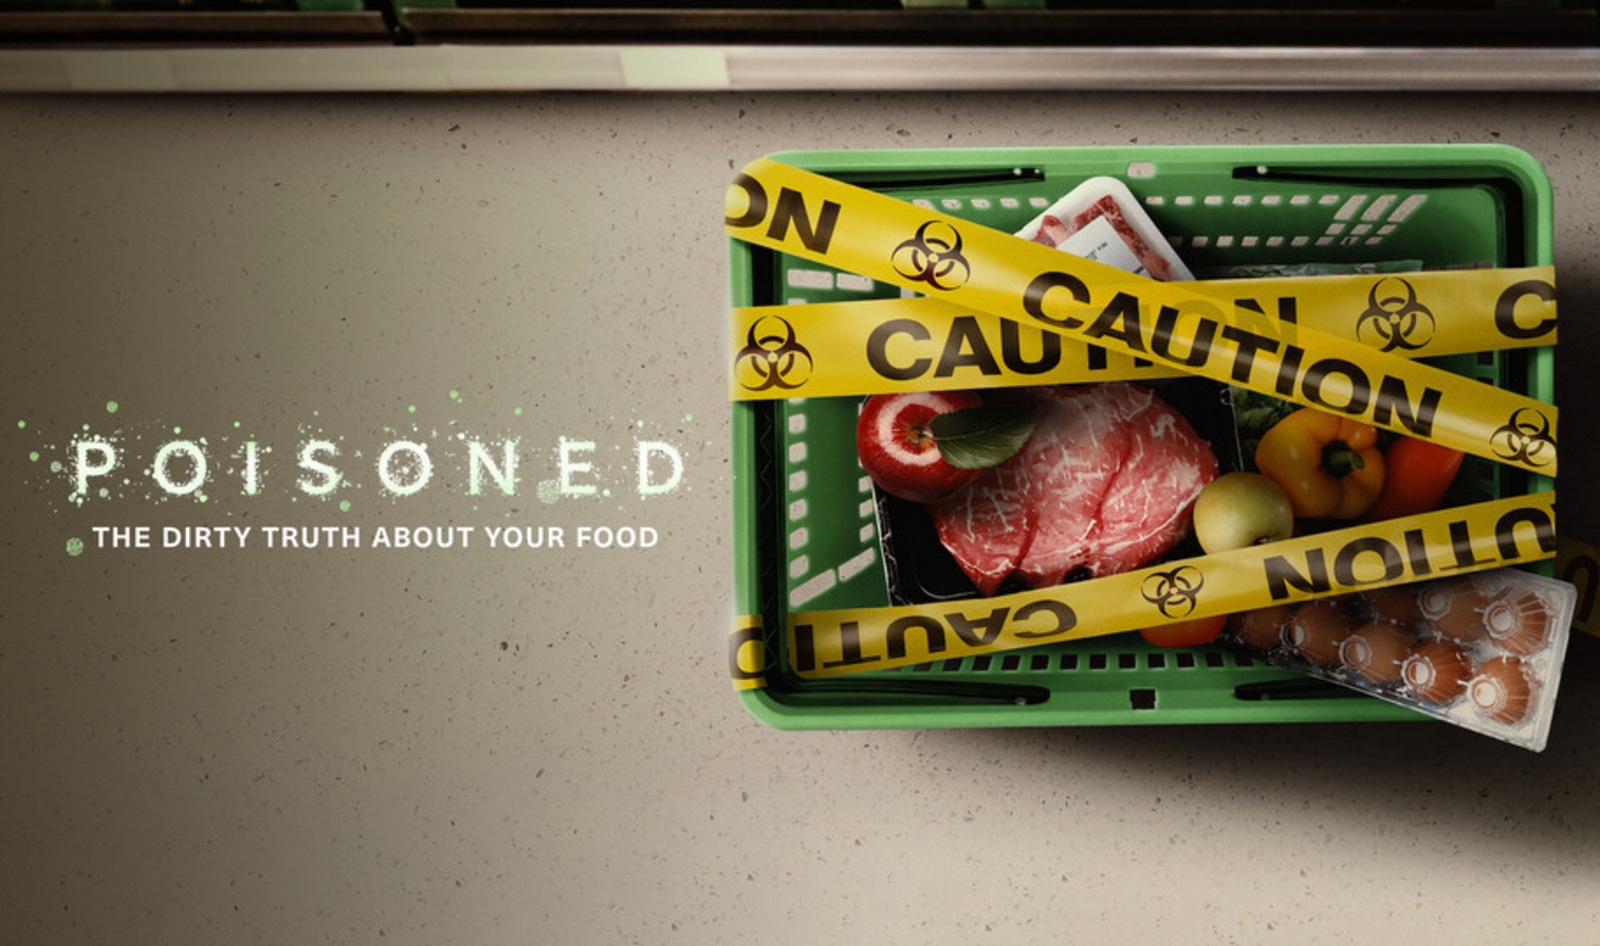 Why Netflix's New Food Documentary 'Poisoned' Is More Like a Horror Film